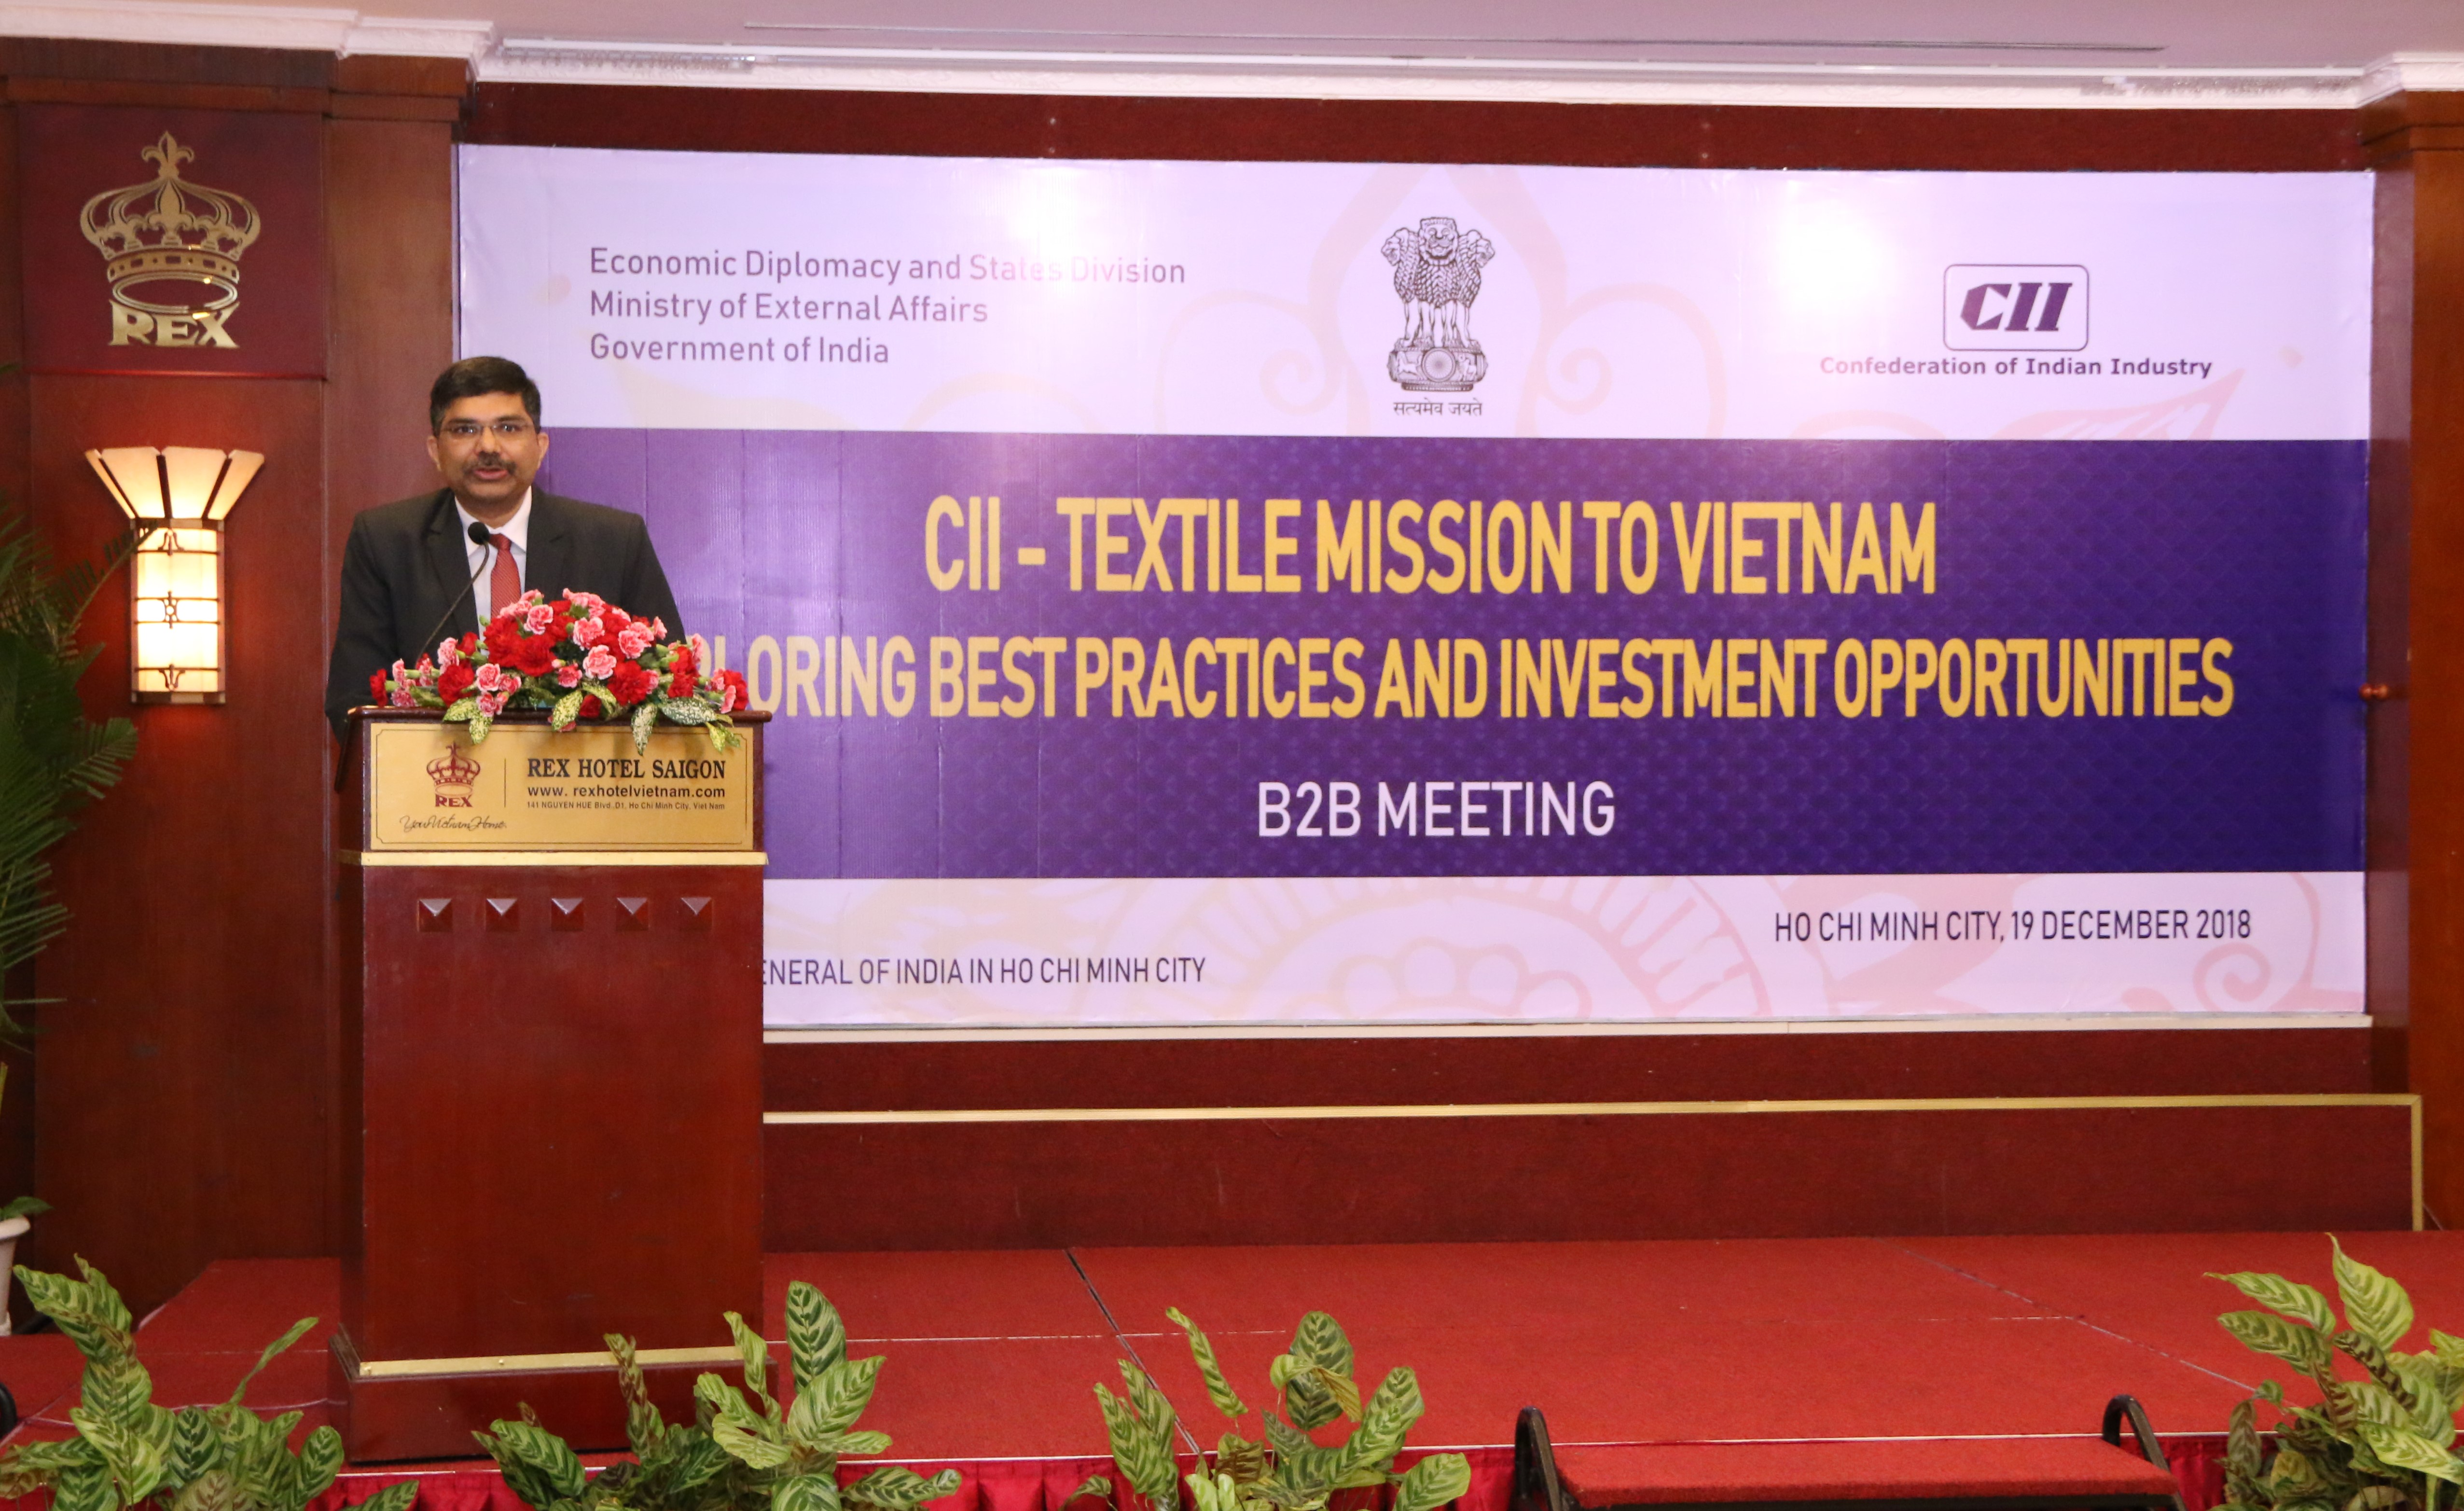 Indian firms seek investment opportunities in textiles, garments in Ho Chi Minh City